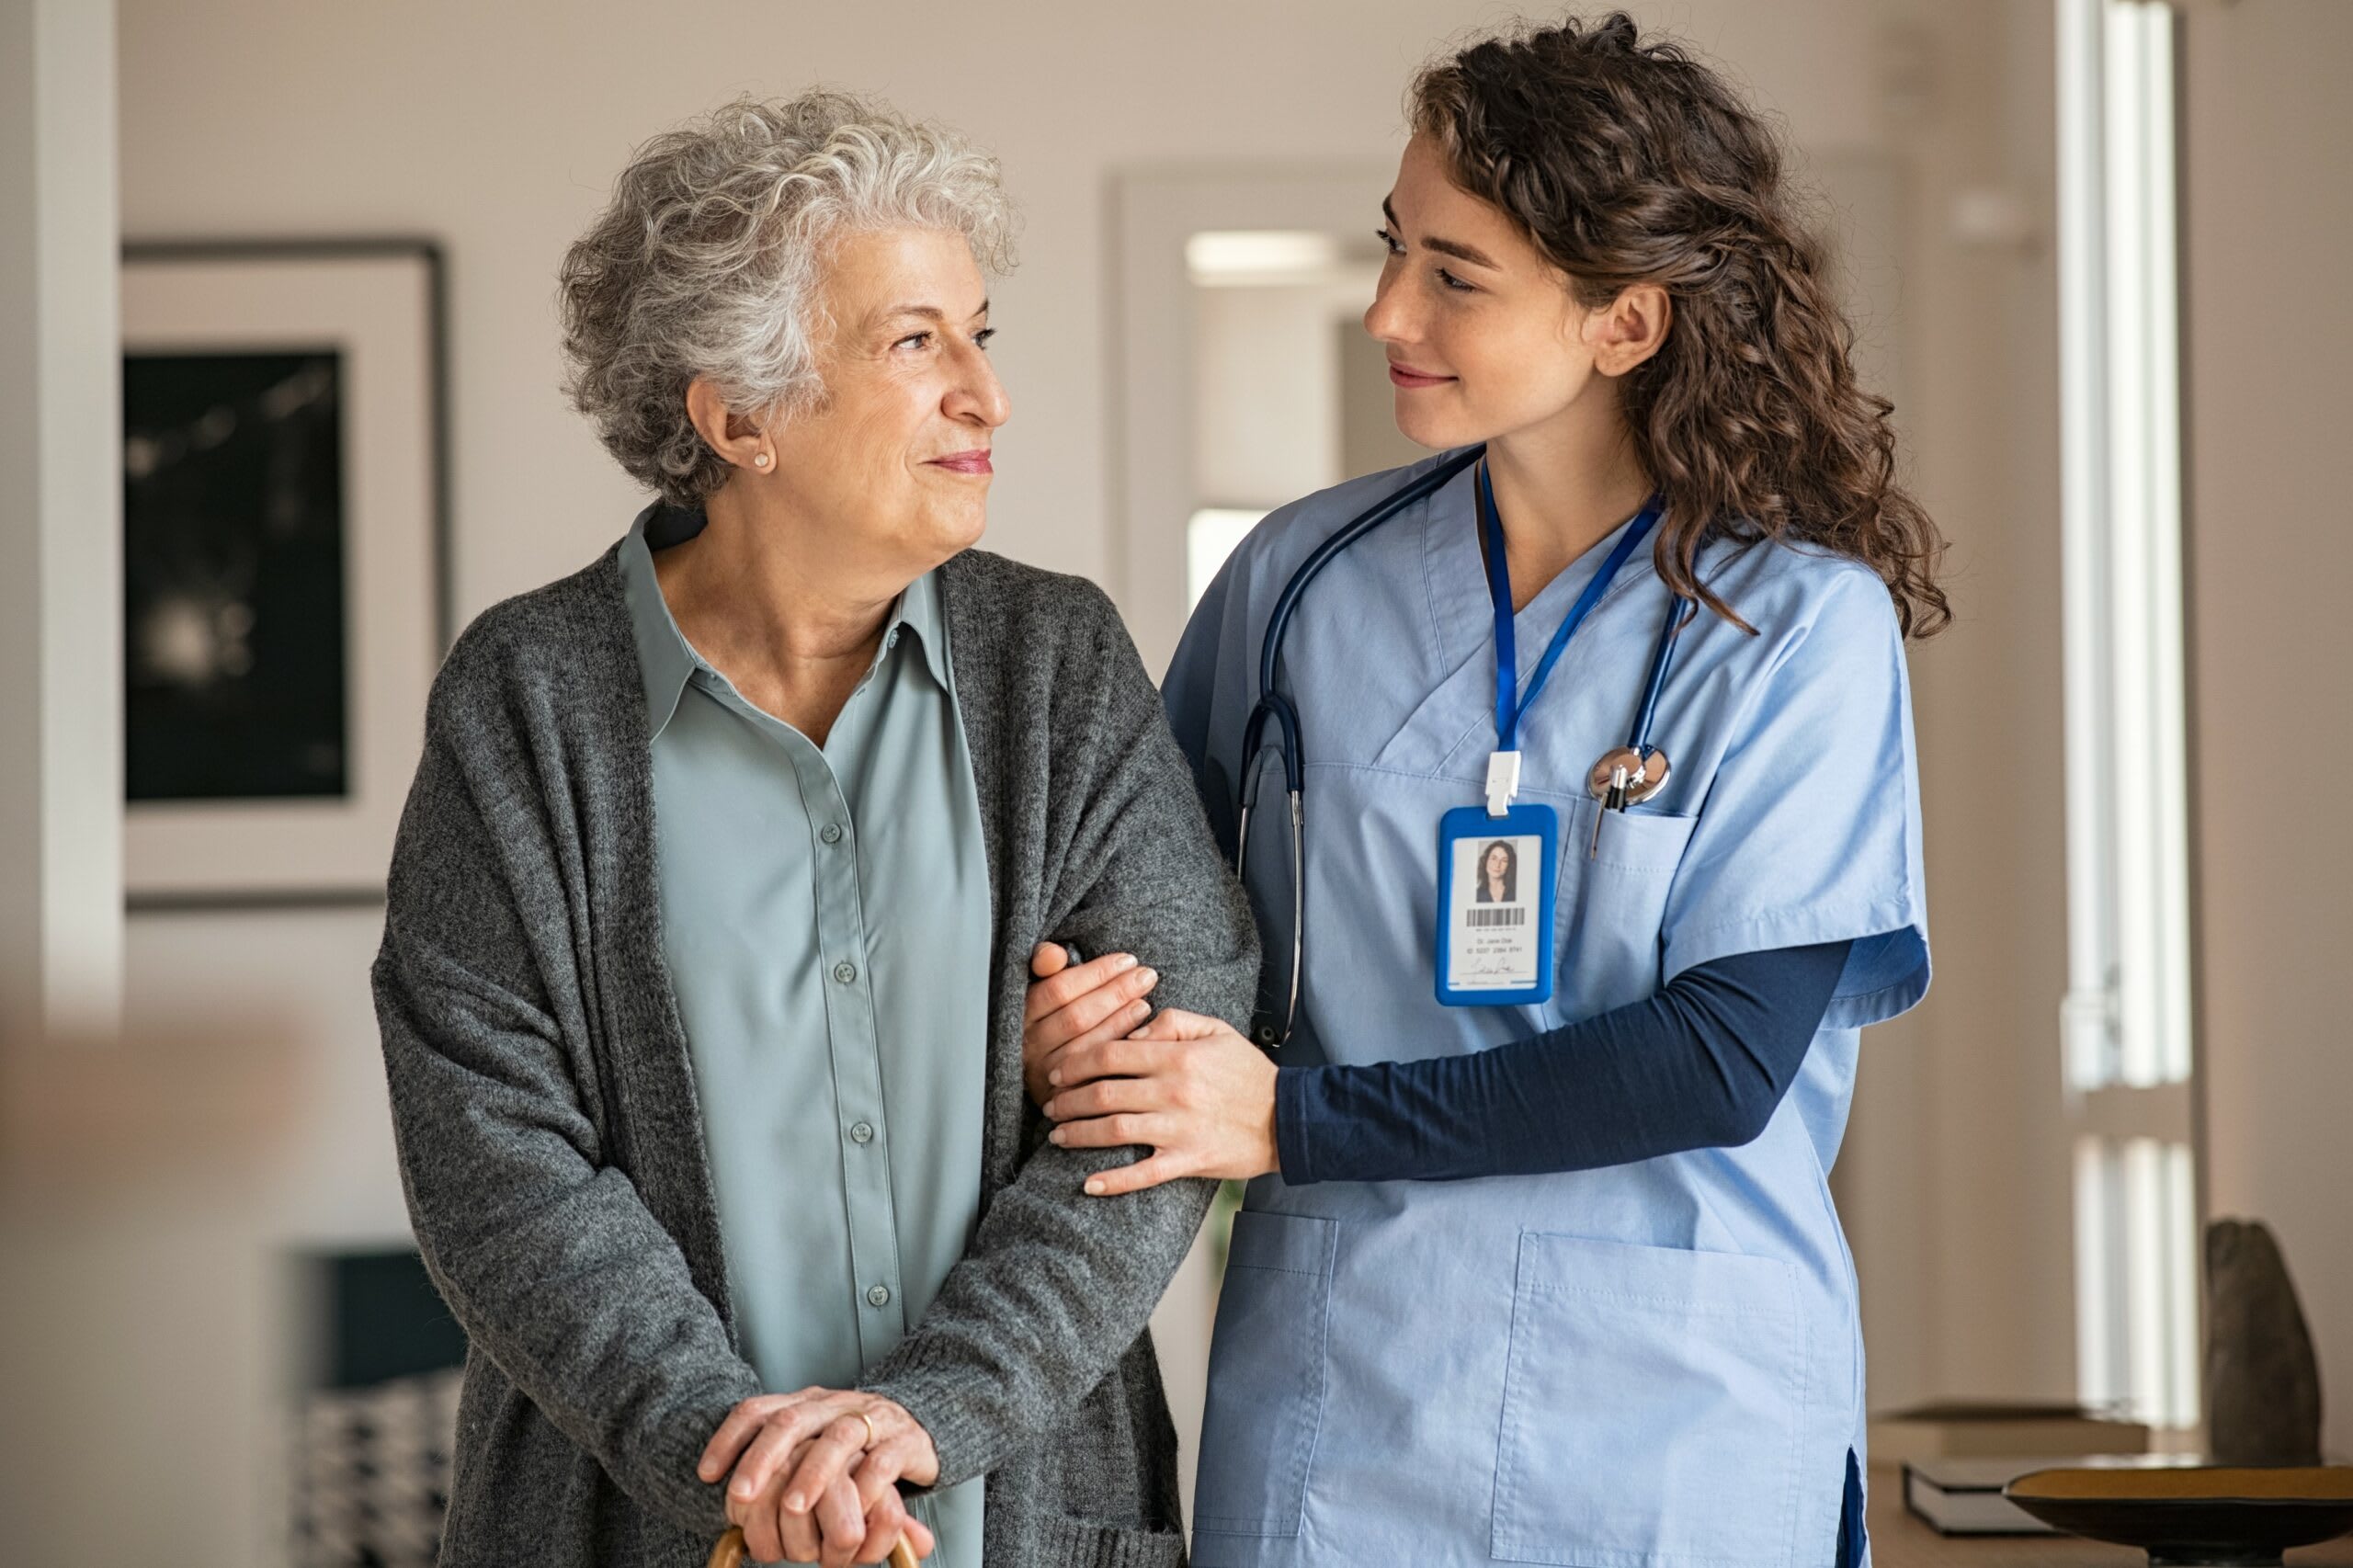 A senior woman and a woman in scrubs walk down a hallway while smiling.